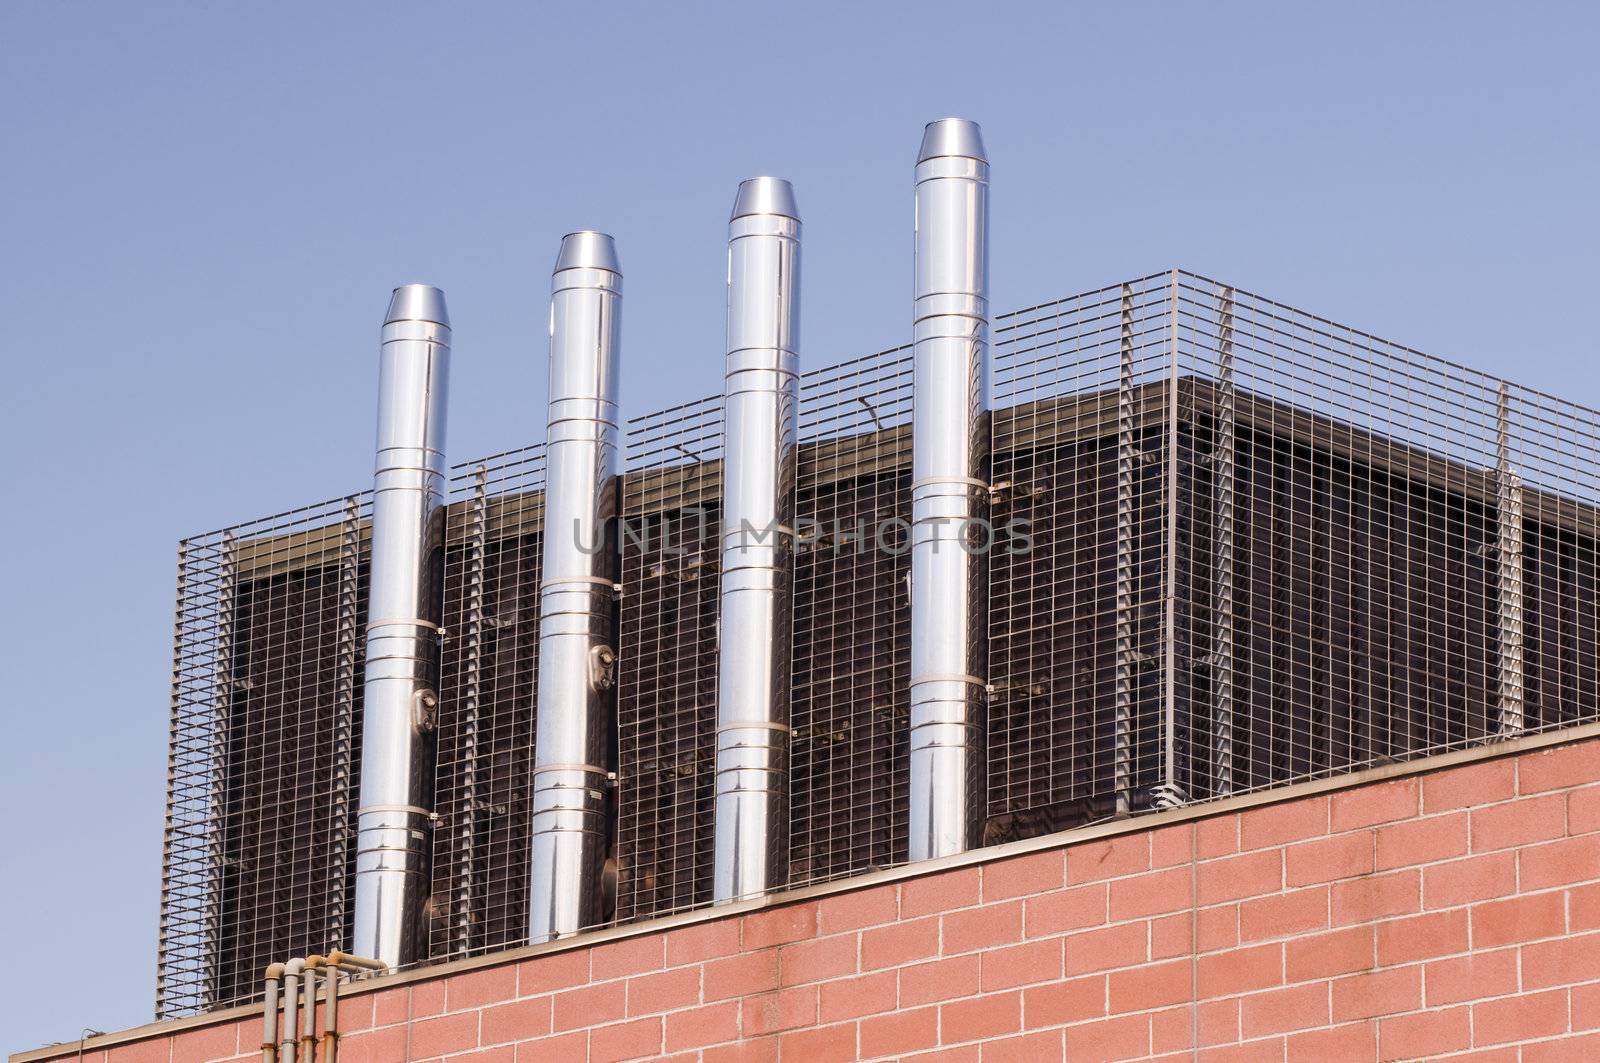 Four modern steel chimneys on a rooftop